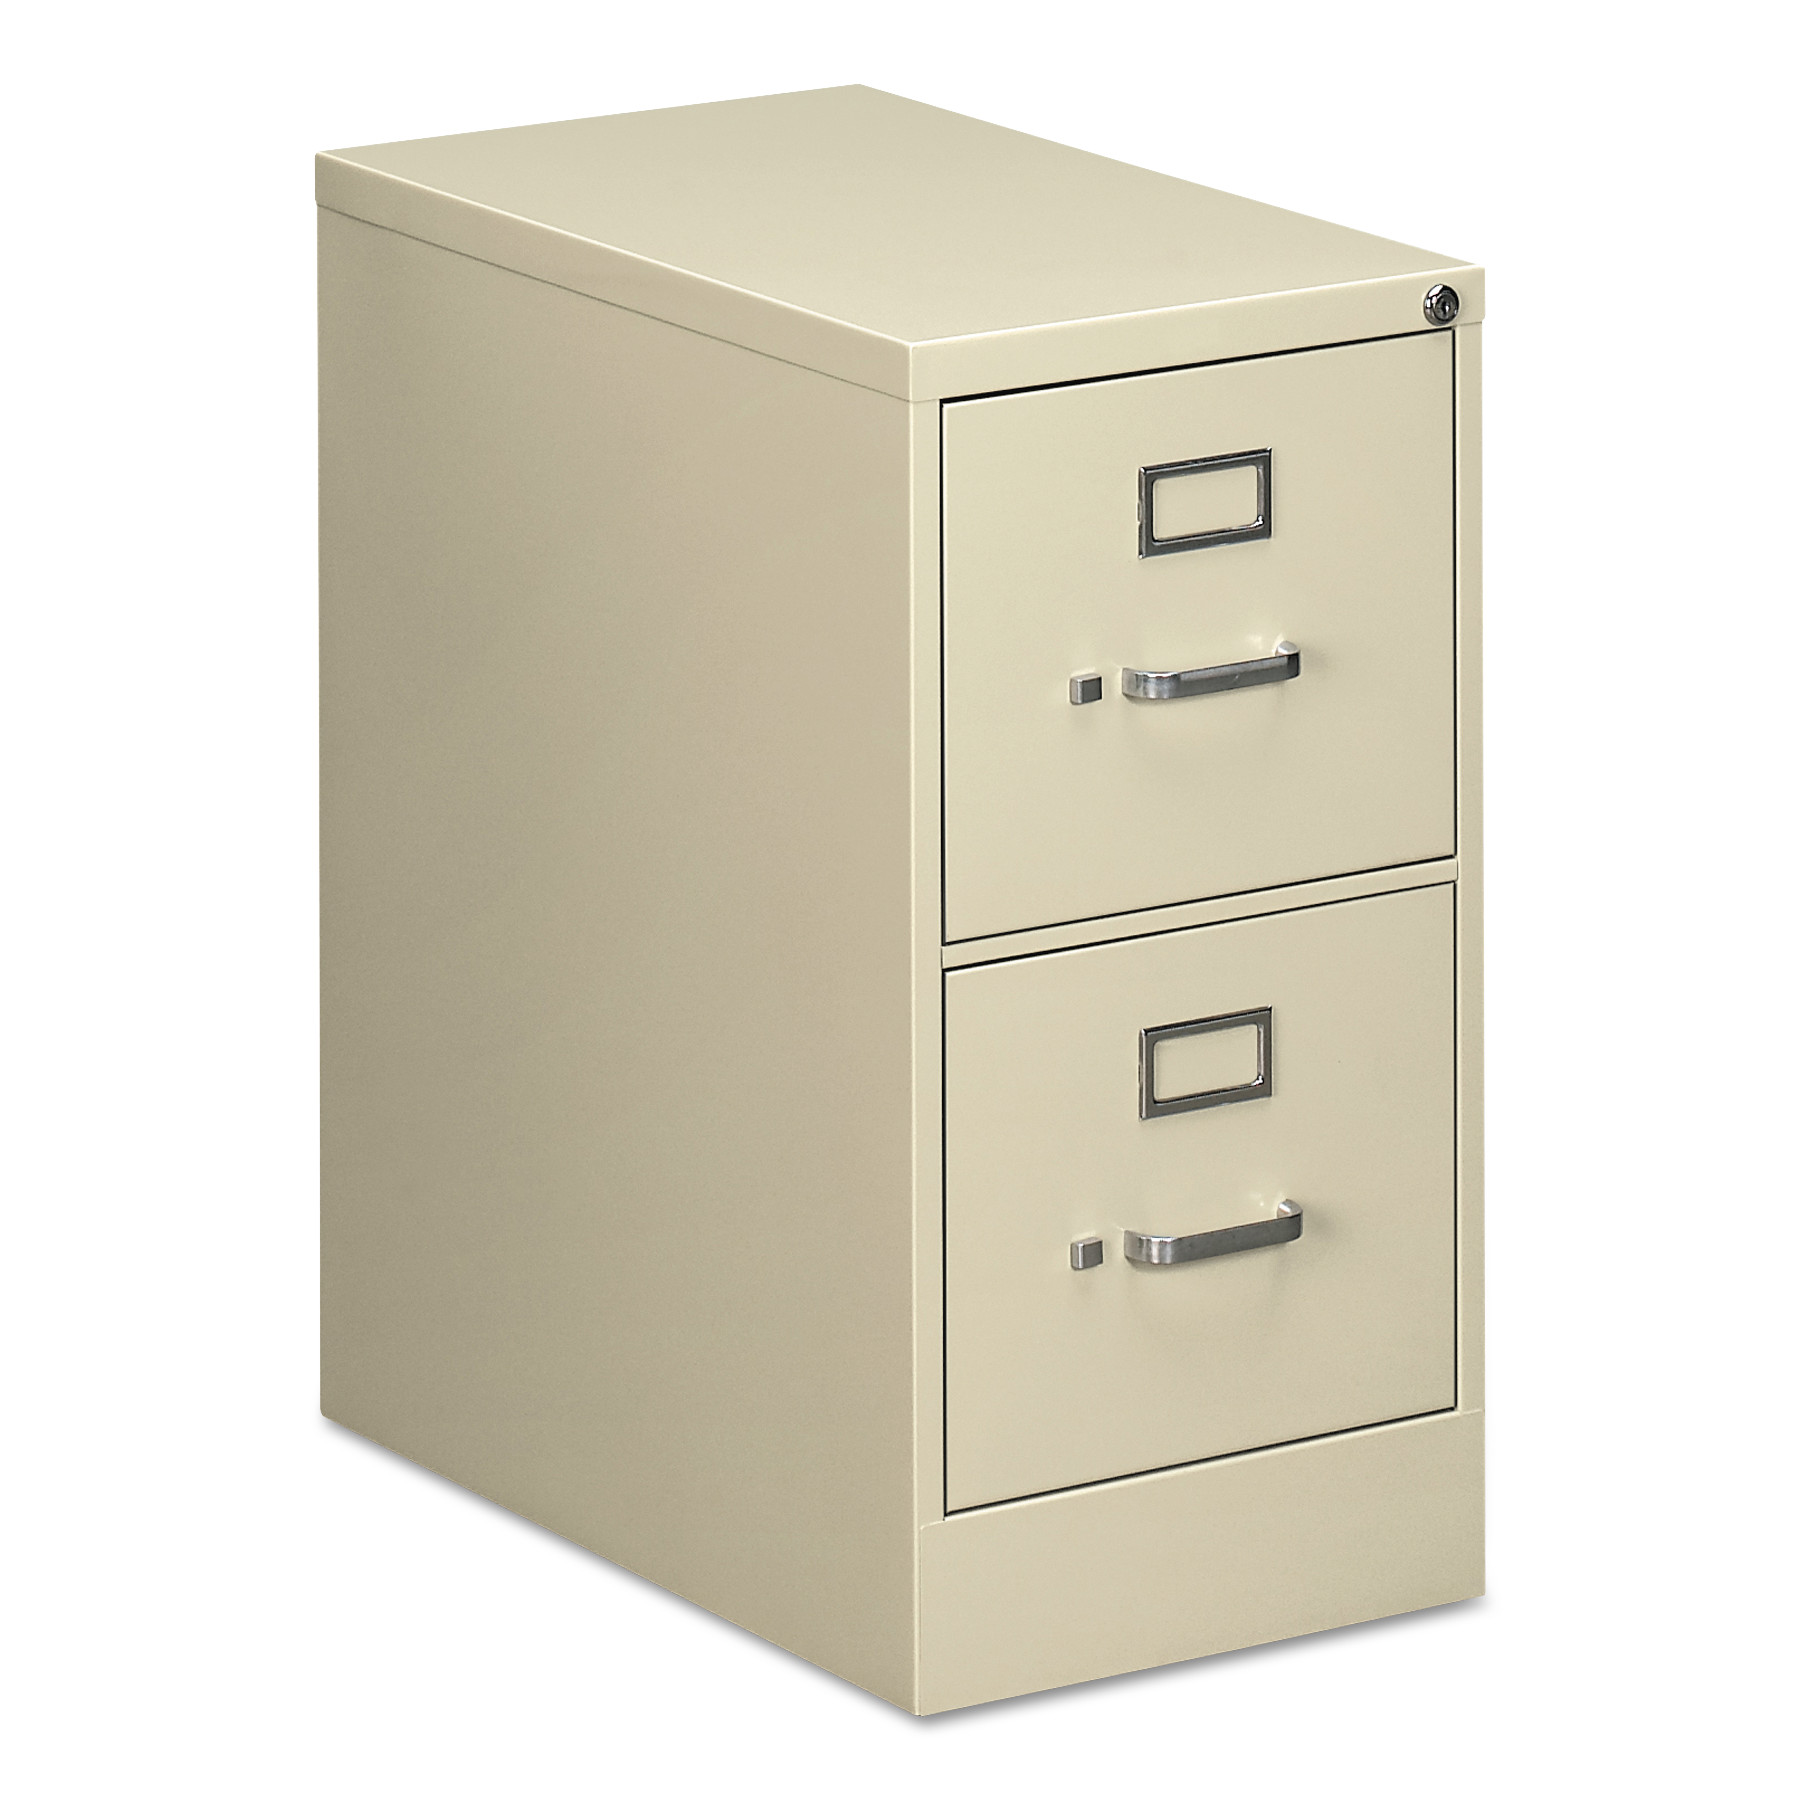 Two-Drawer Economy Vertical File Cabinet, Letter, 15w x 25d x 29h, Putty